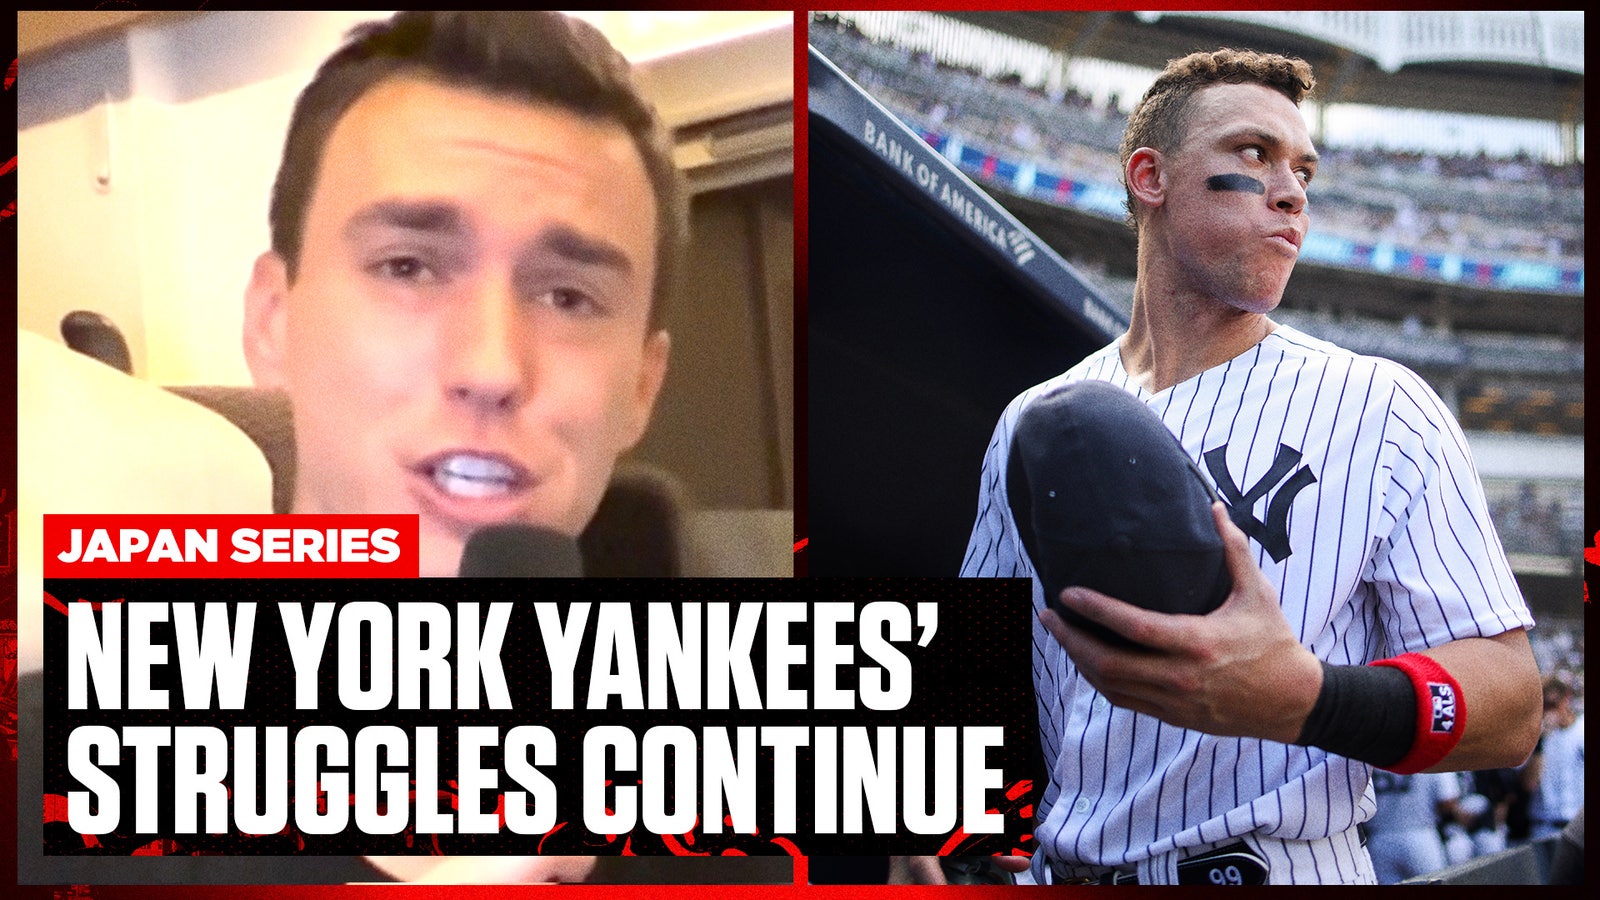 What's wrong with the Yankees?